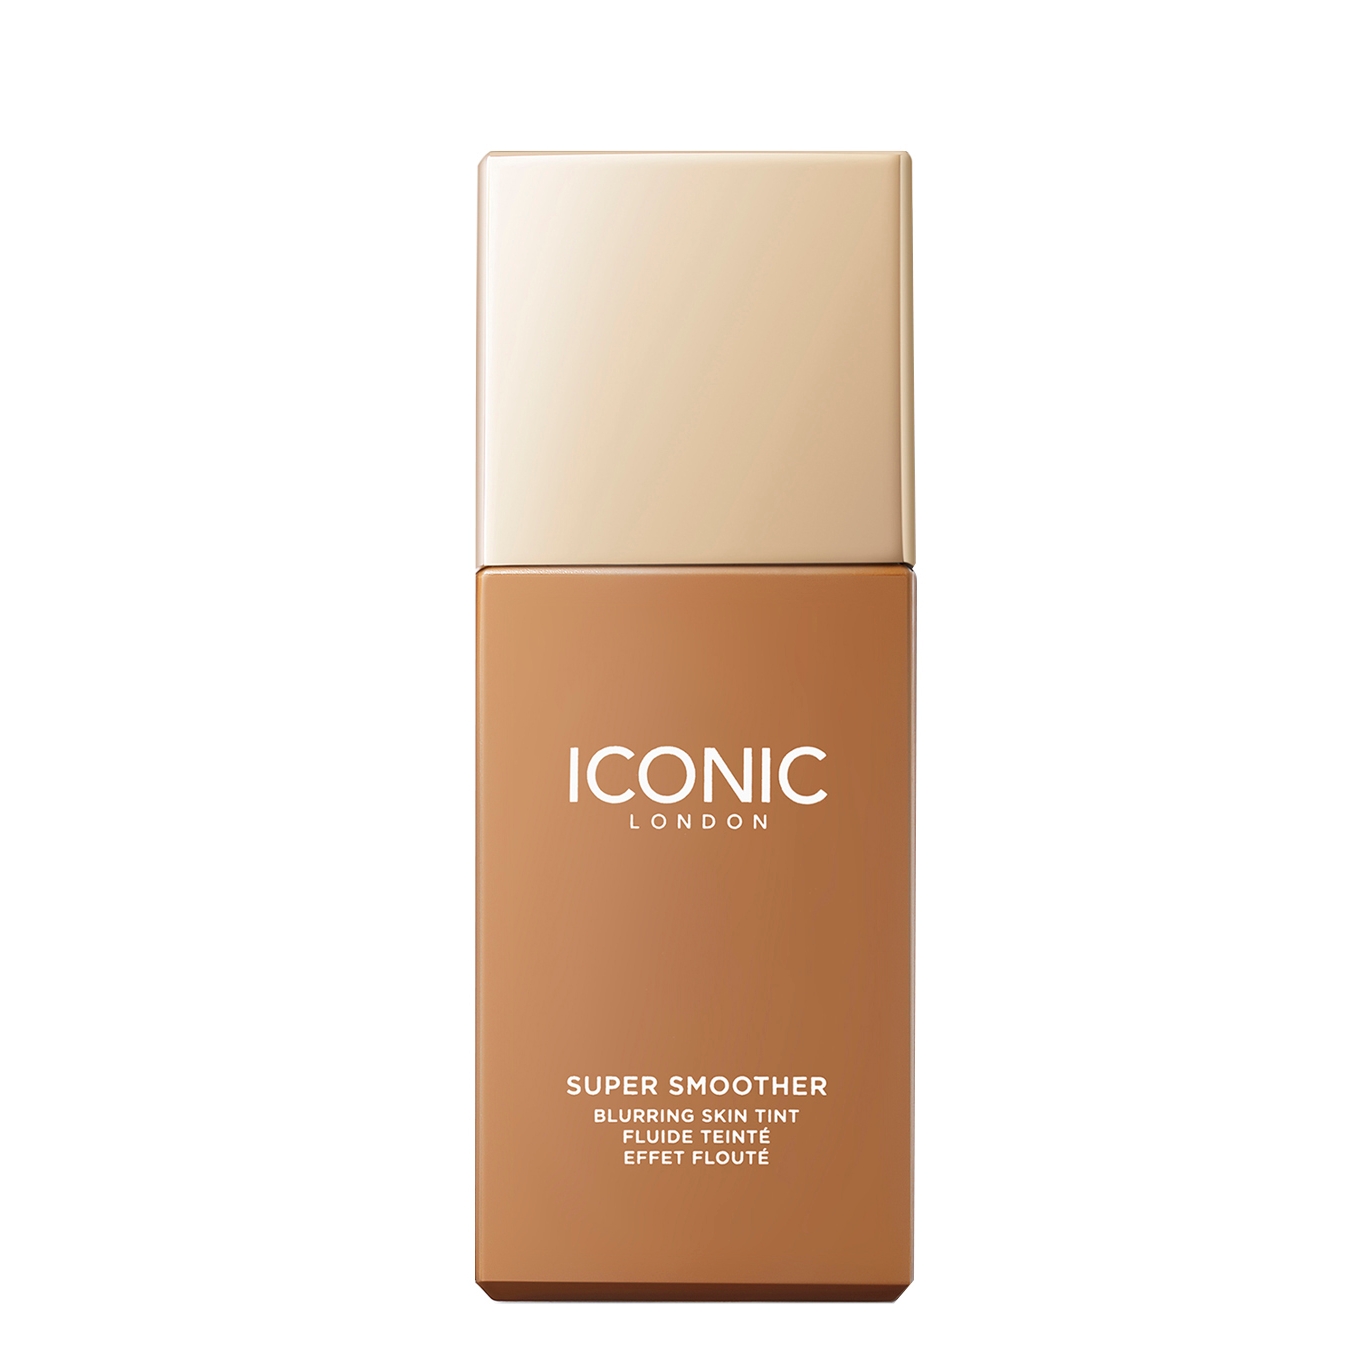 Iconic London Super Smoother Blurring Skin Tint - Colour Neutral Tan